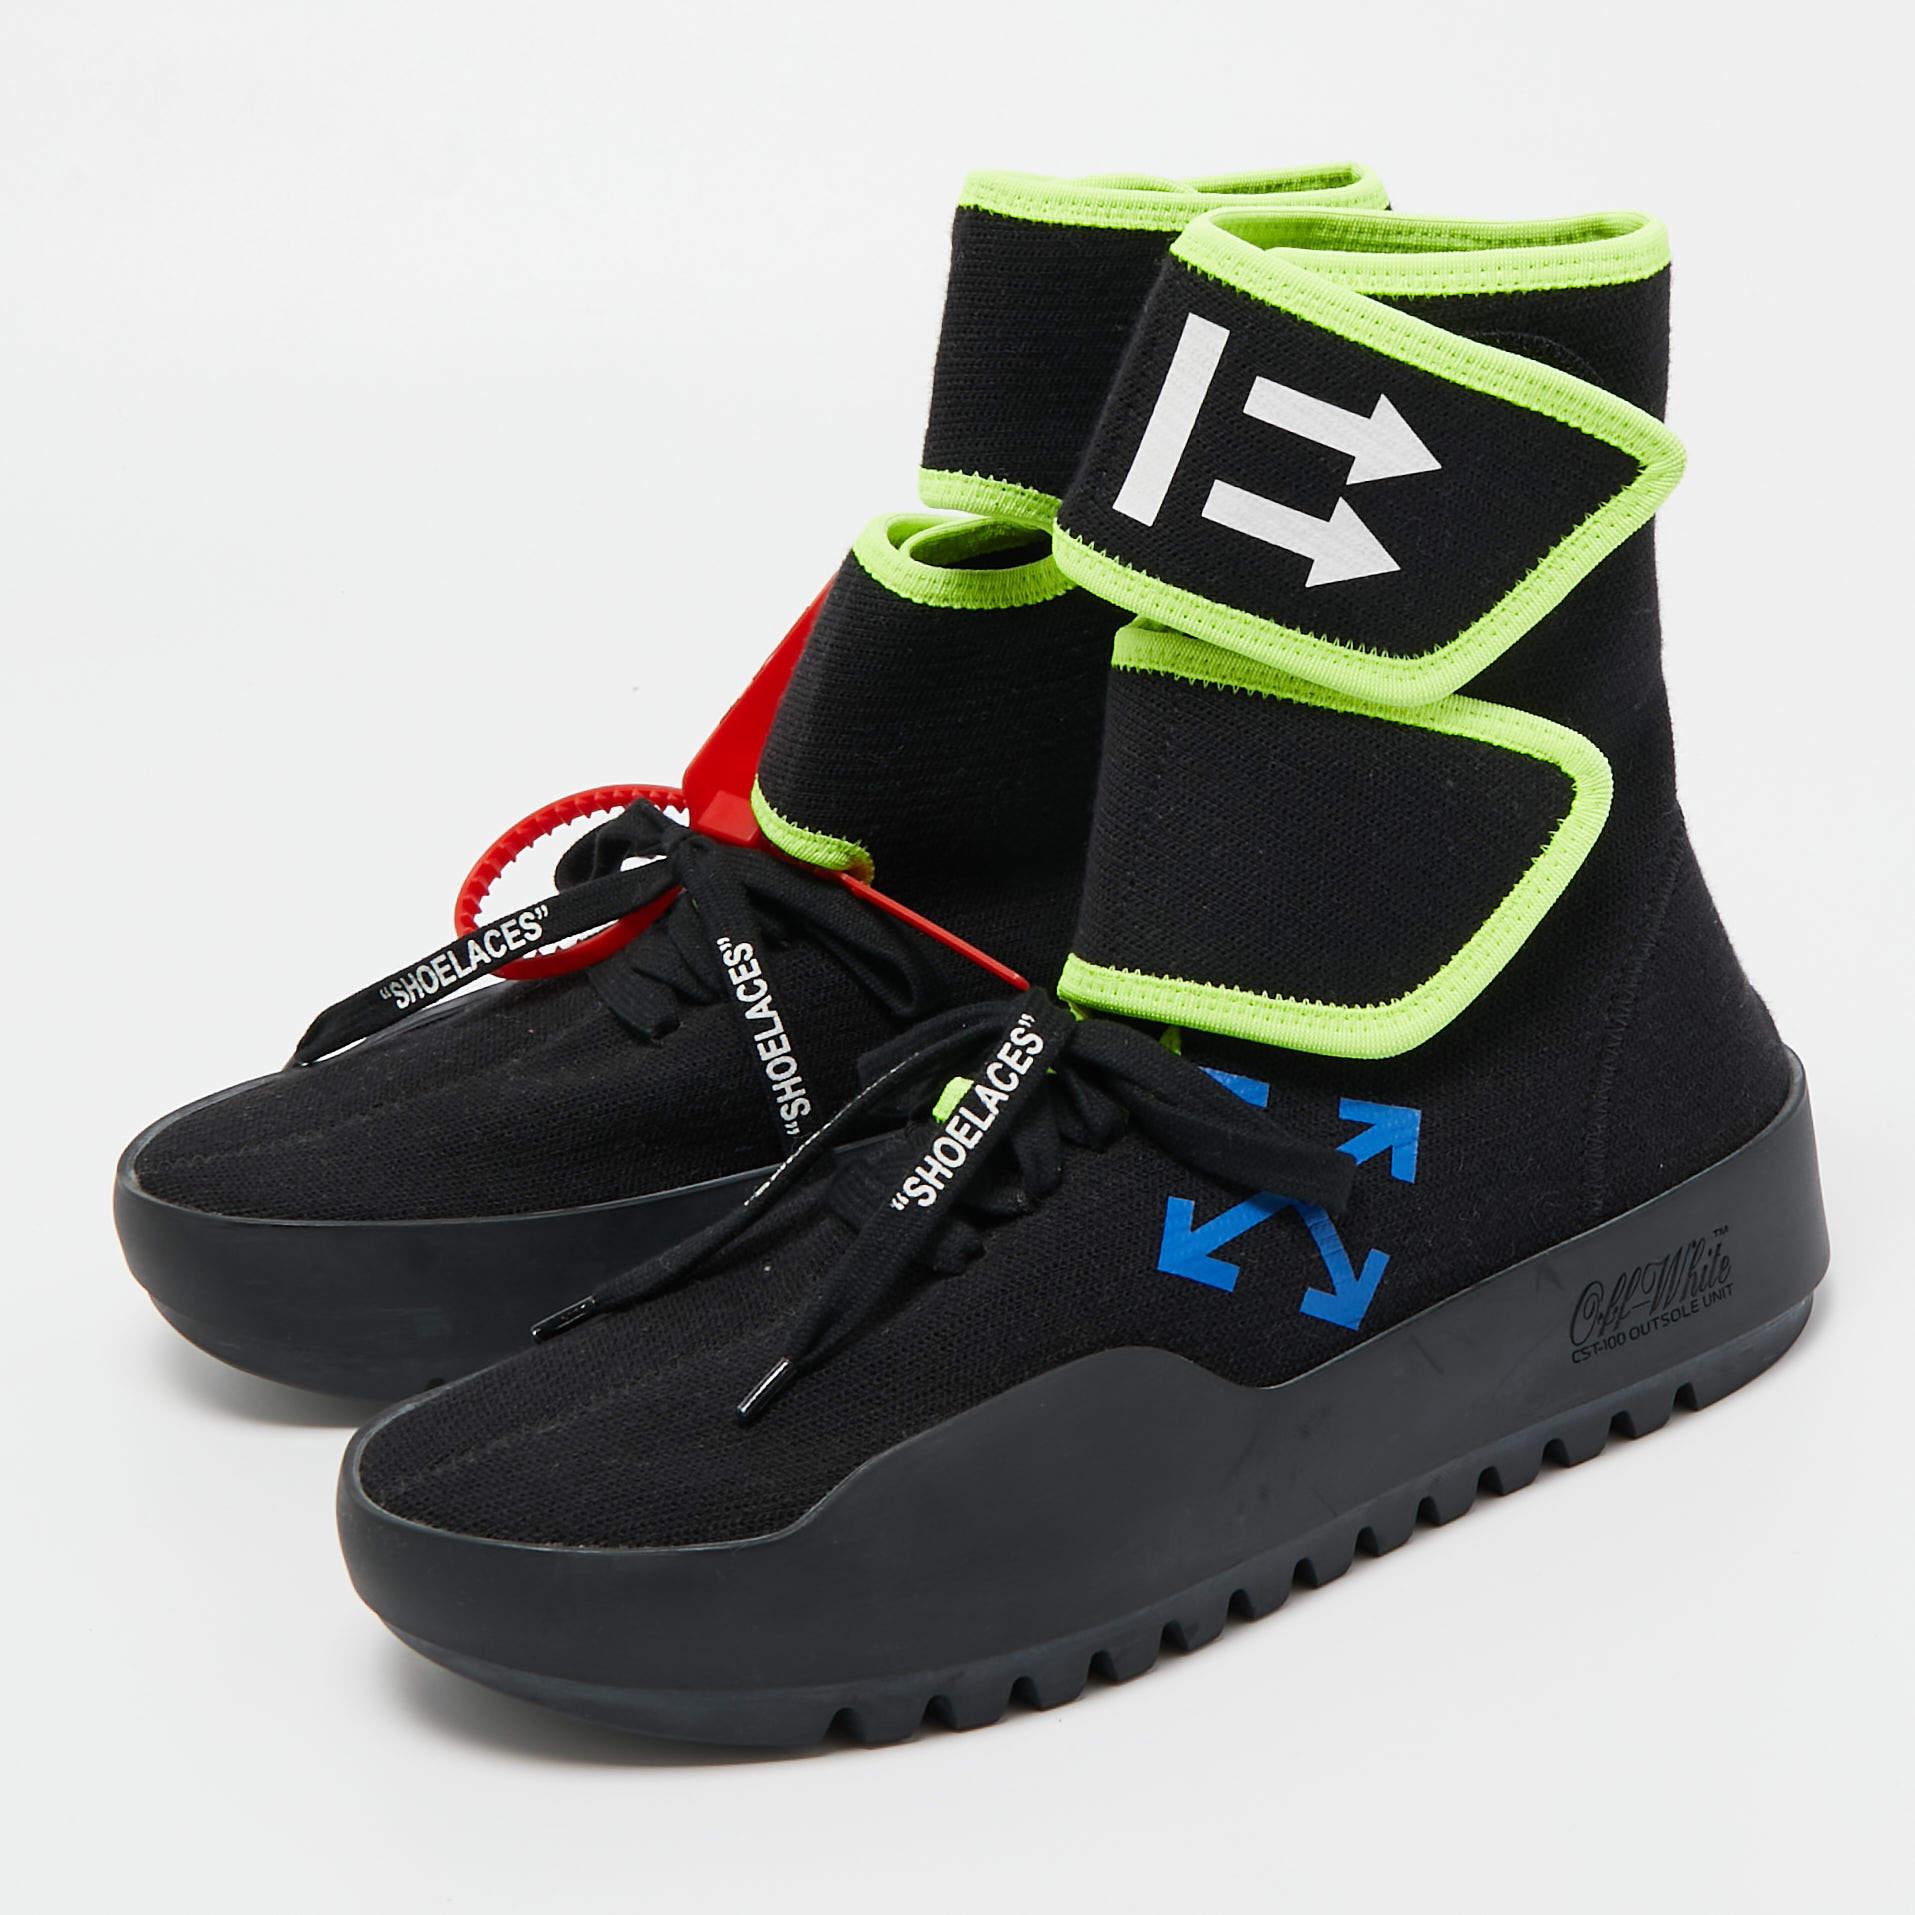 Off-White Black Knit Fabric Moto Wrap Sneakers Size 39 For Sale 4